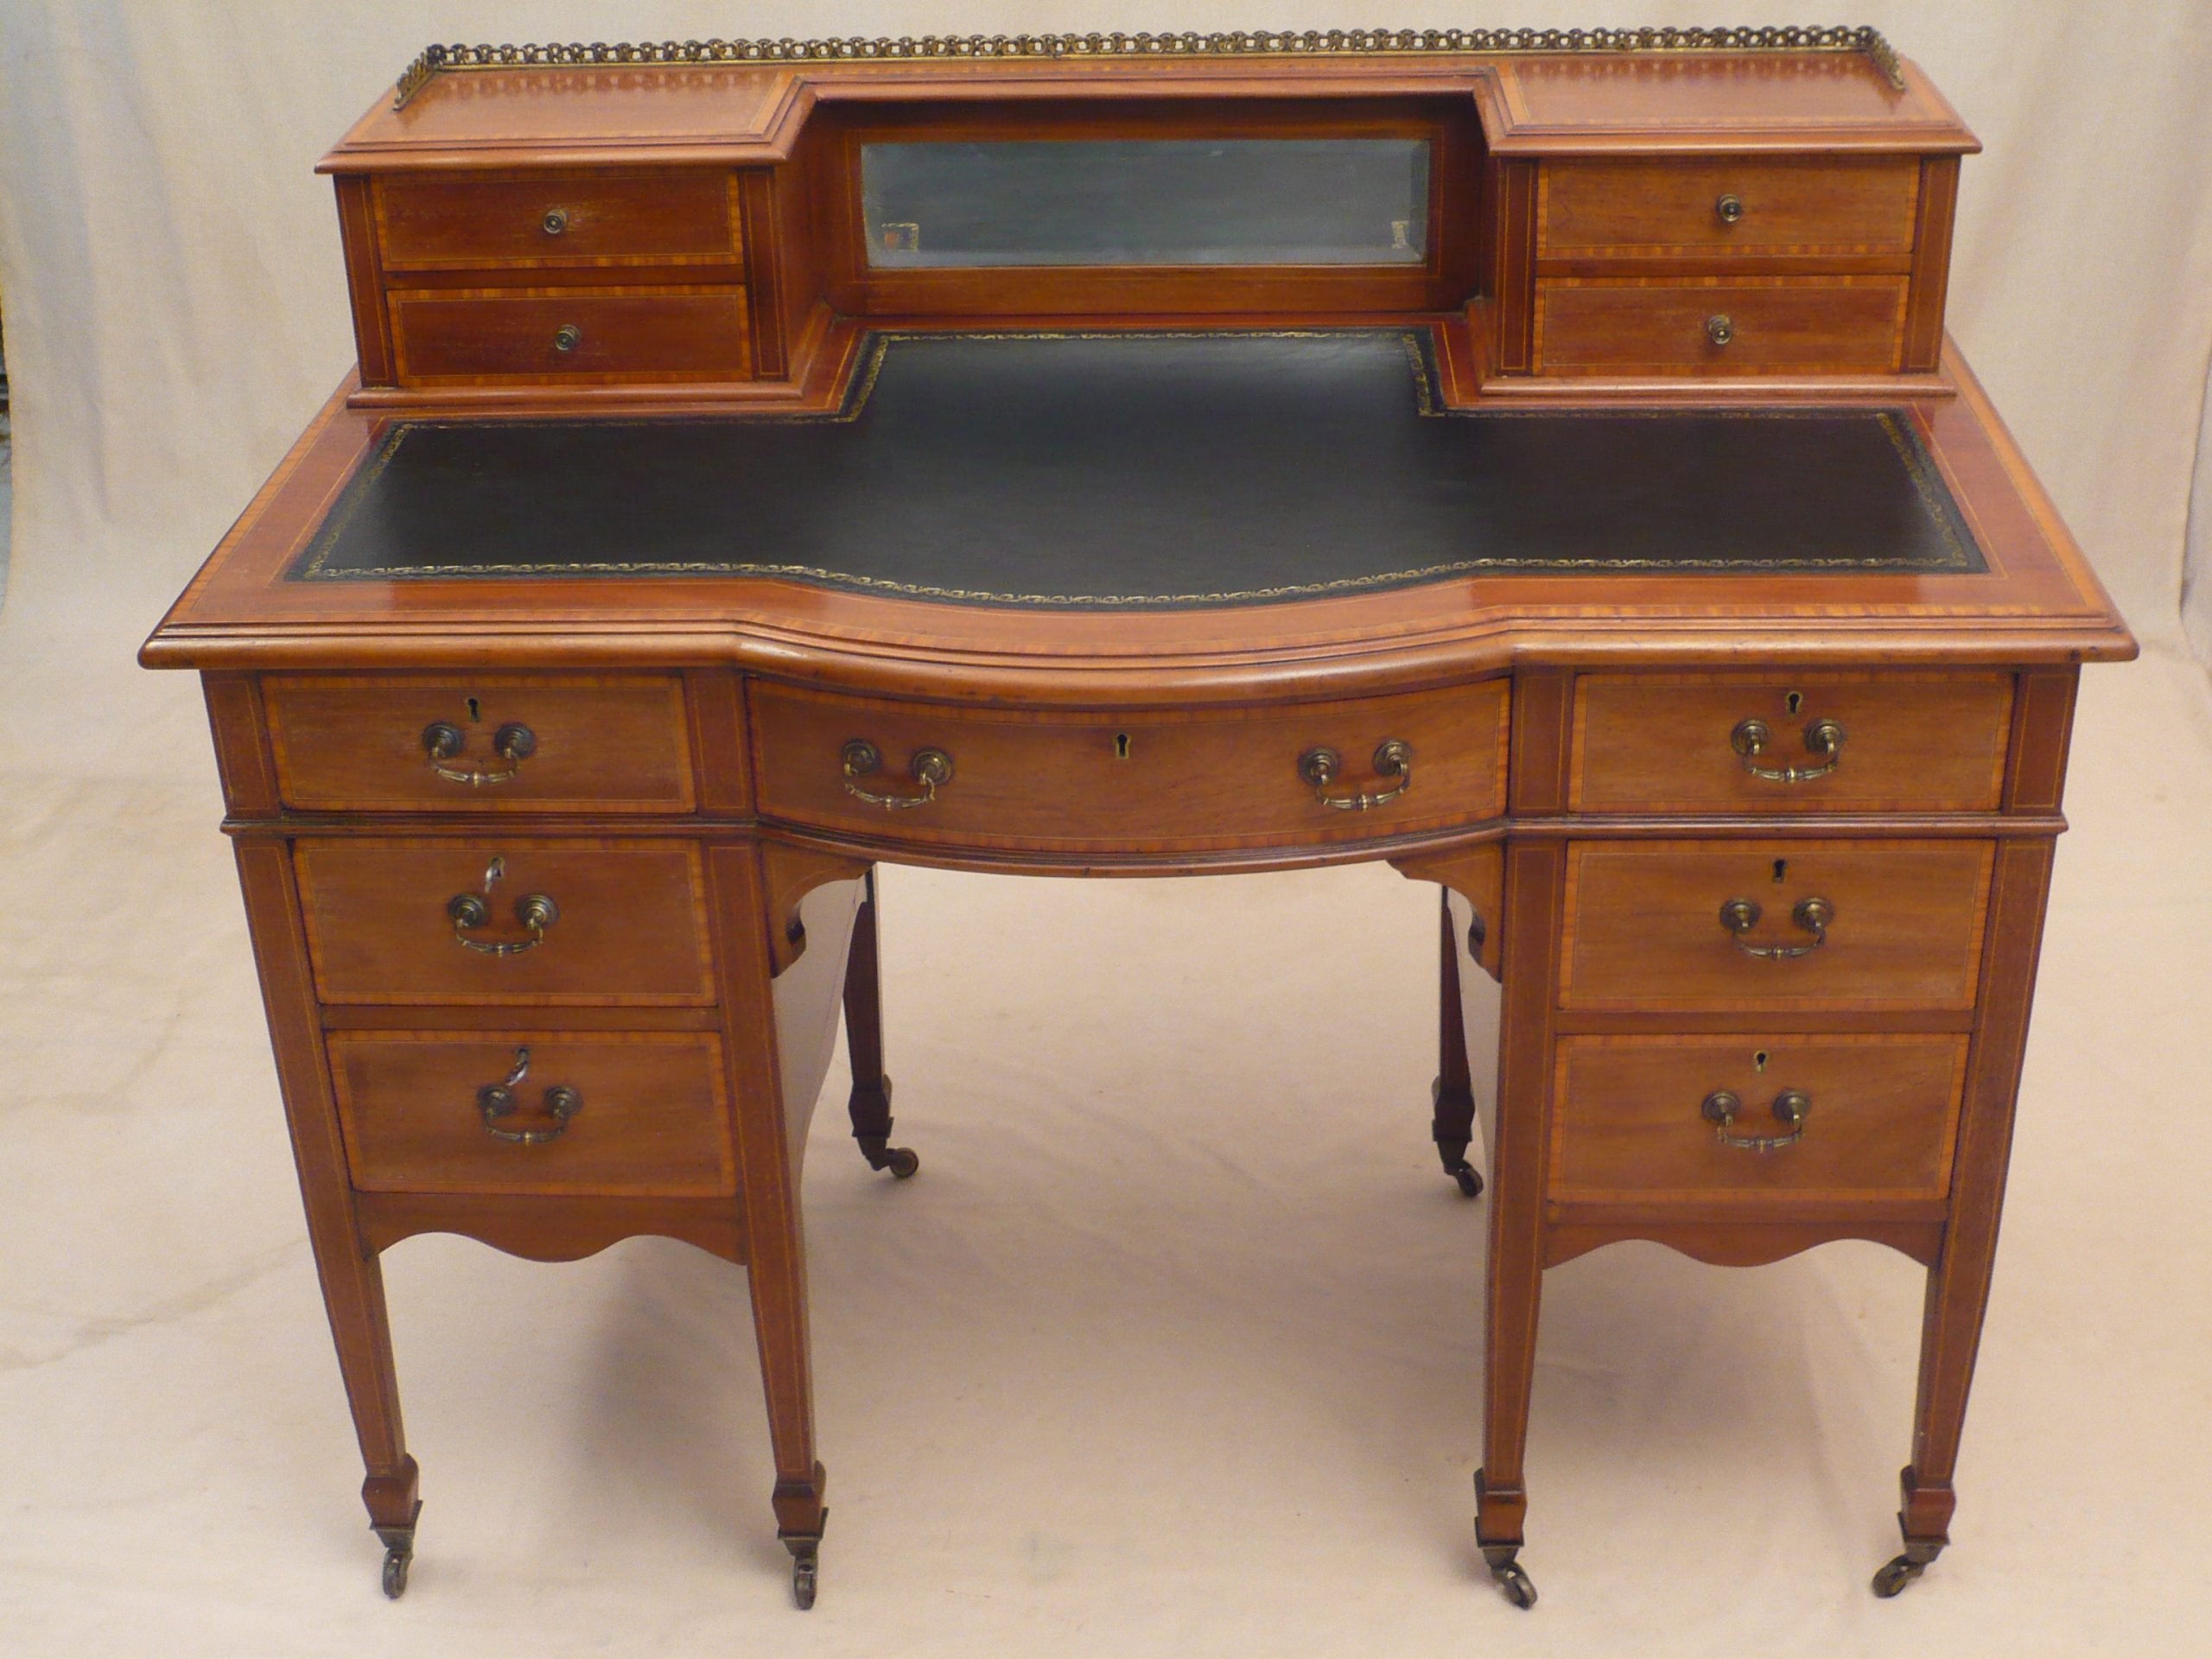 ANTIQUE - A LATE VICTORIAN WRITING TABLE